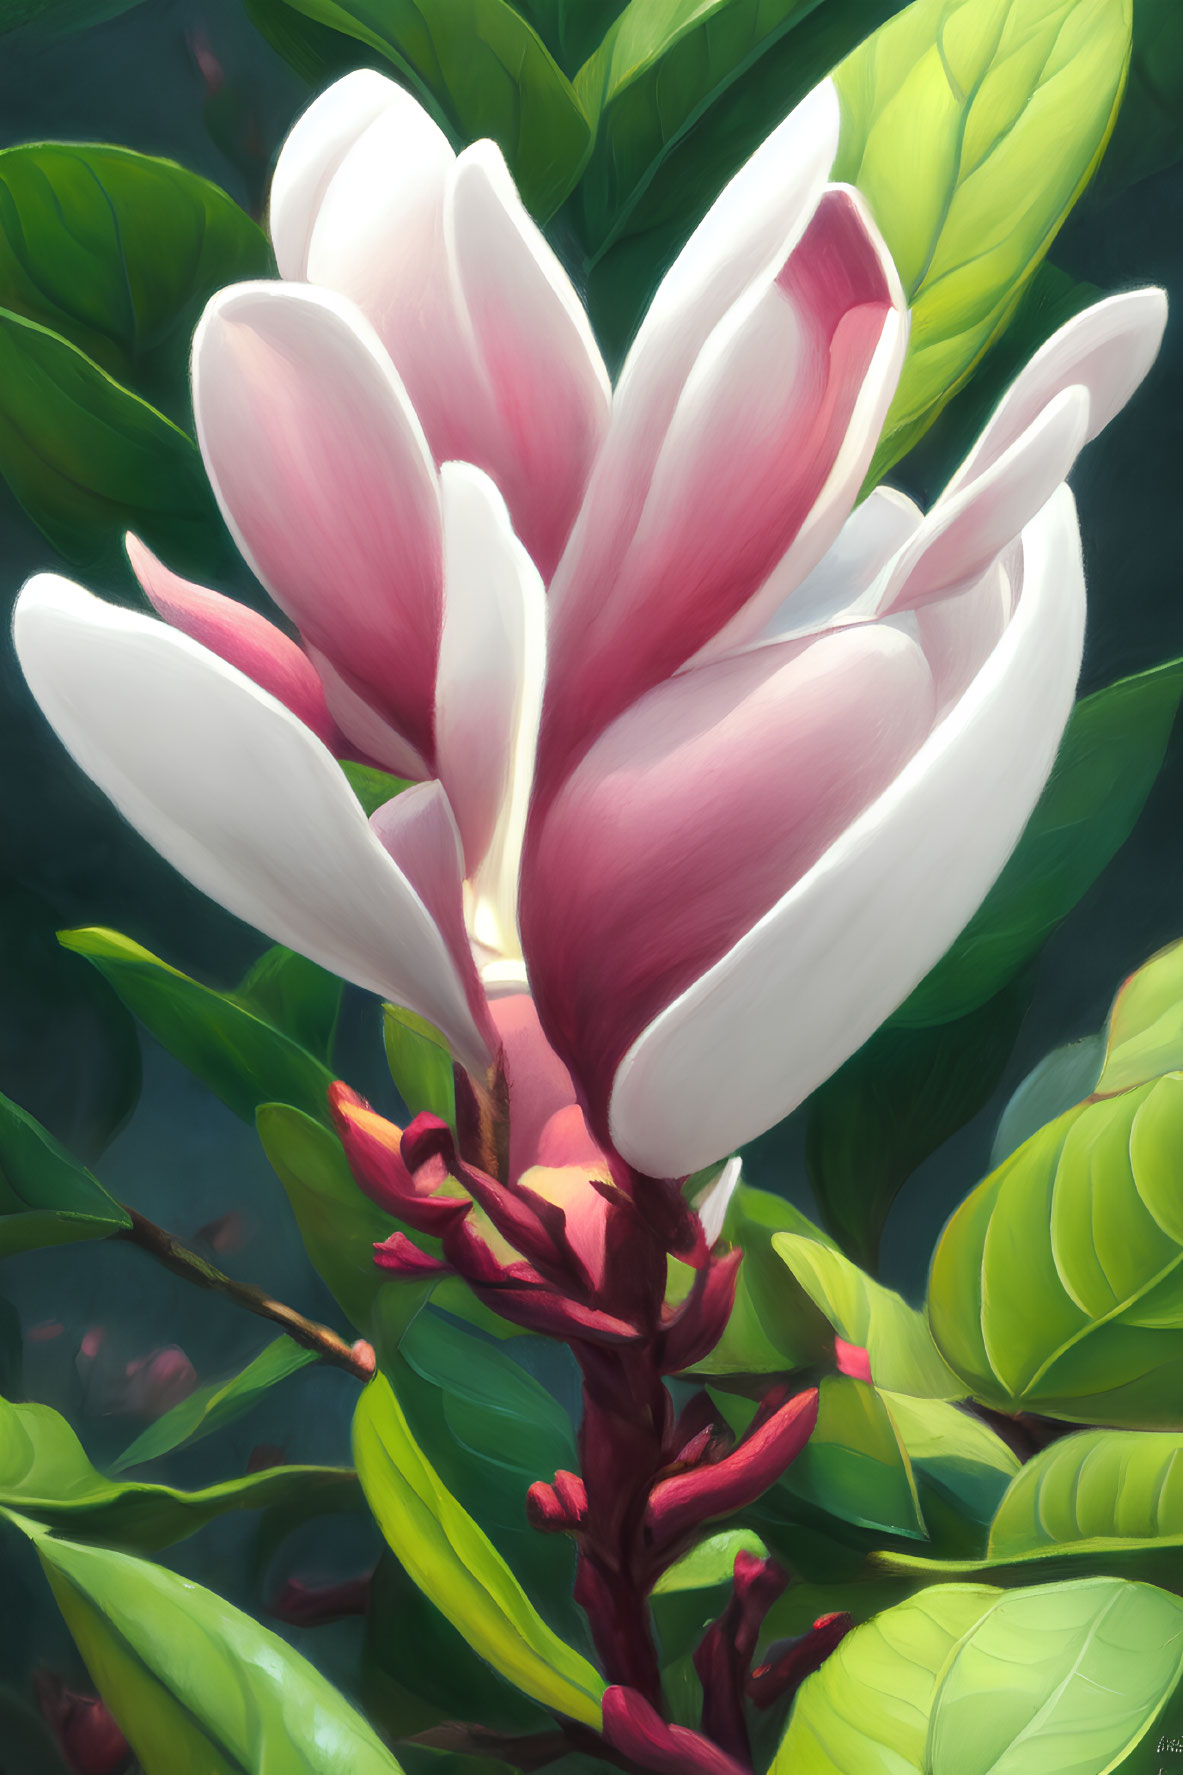 Colorful magnolia flower illustration with green leaves and buds.